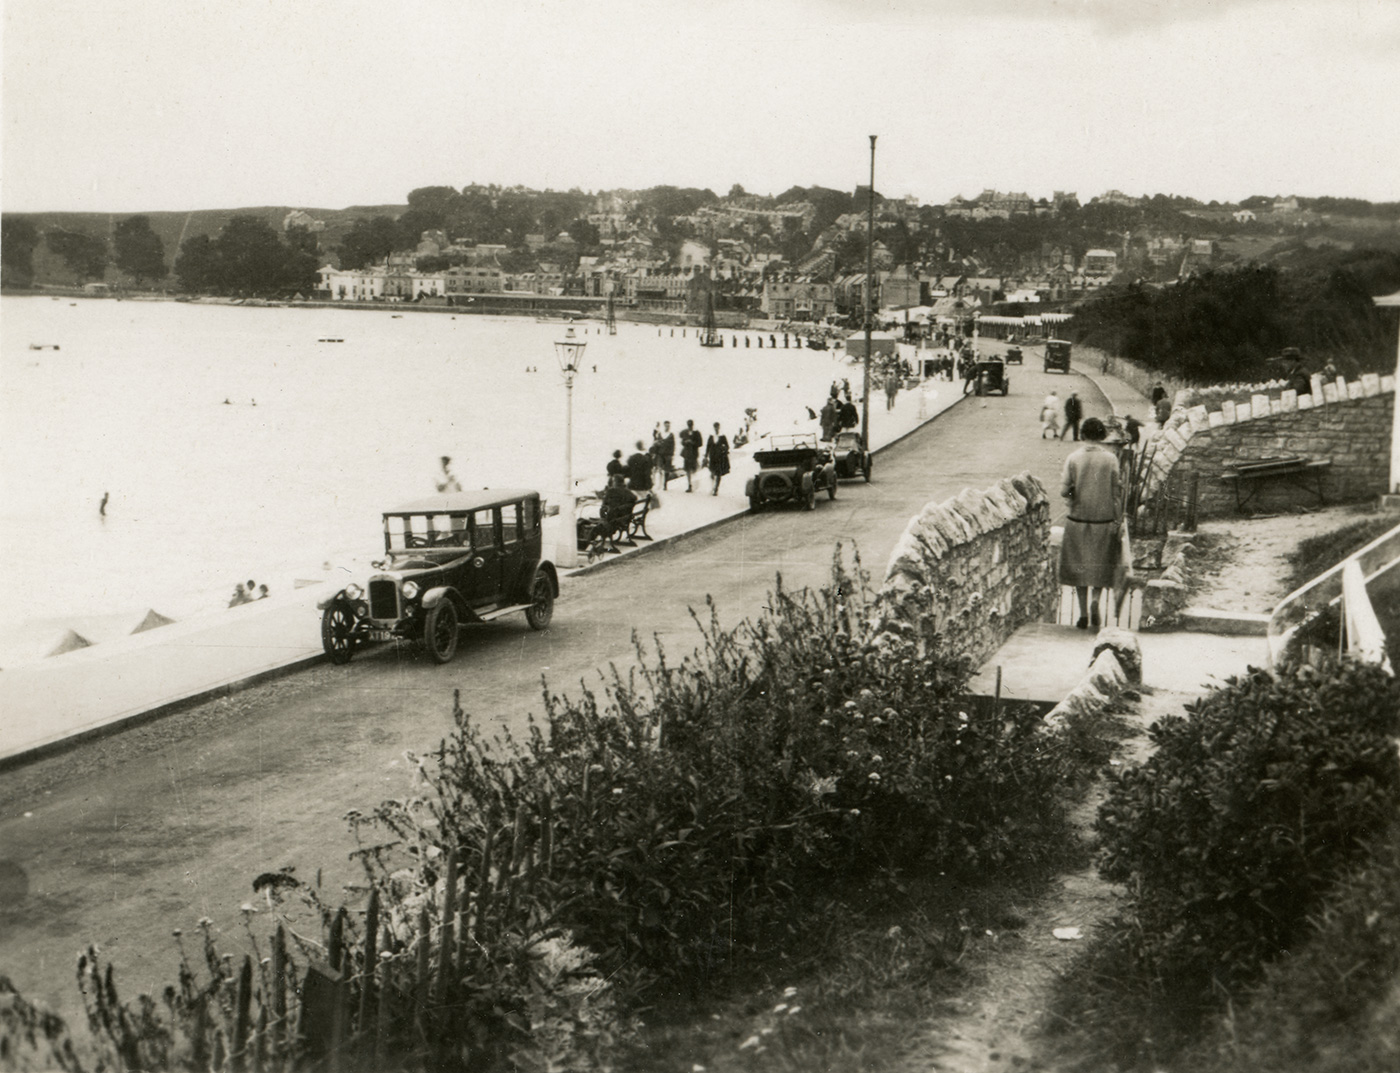 Shore Road and Cars in the 1920s